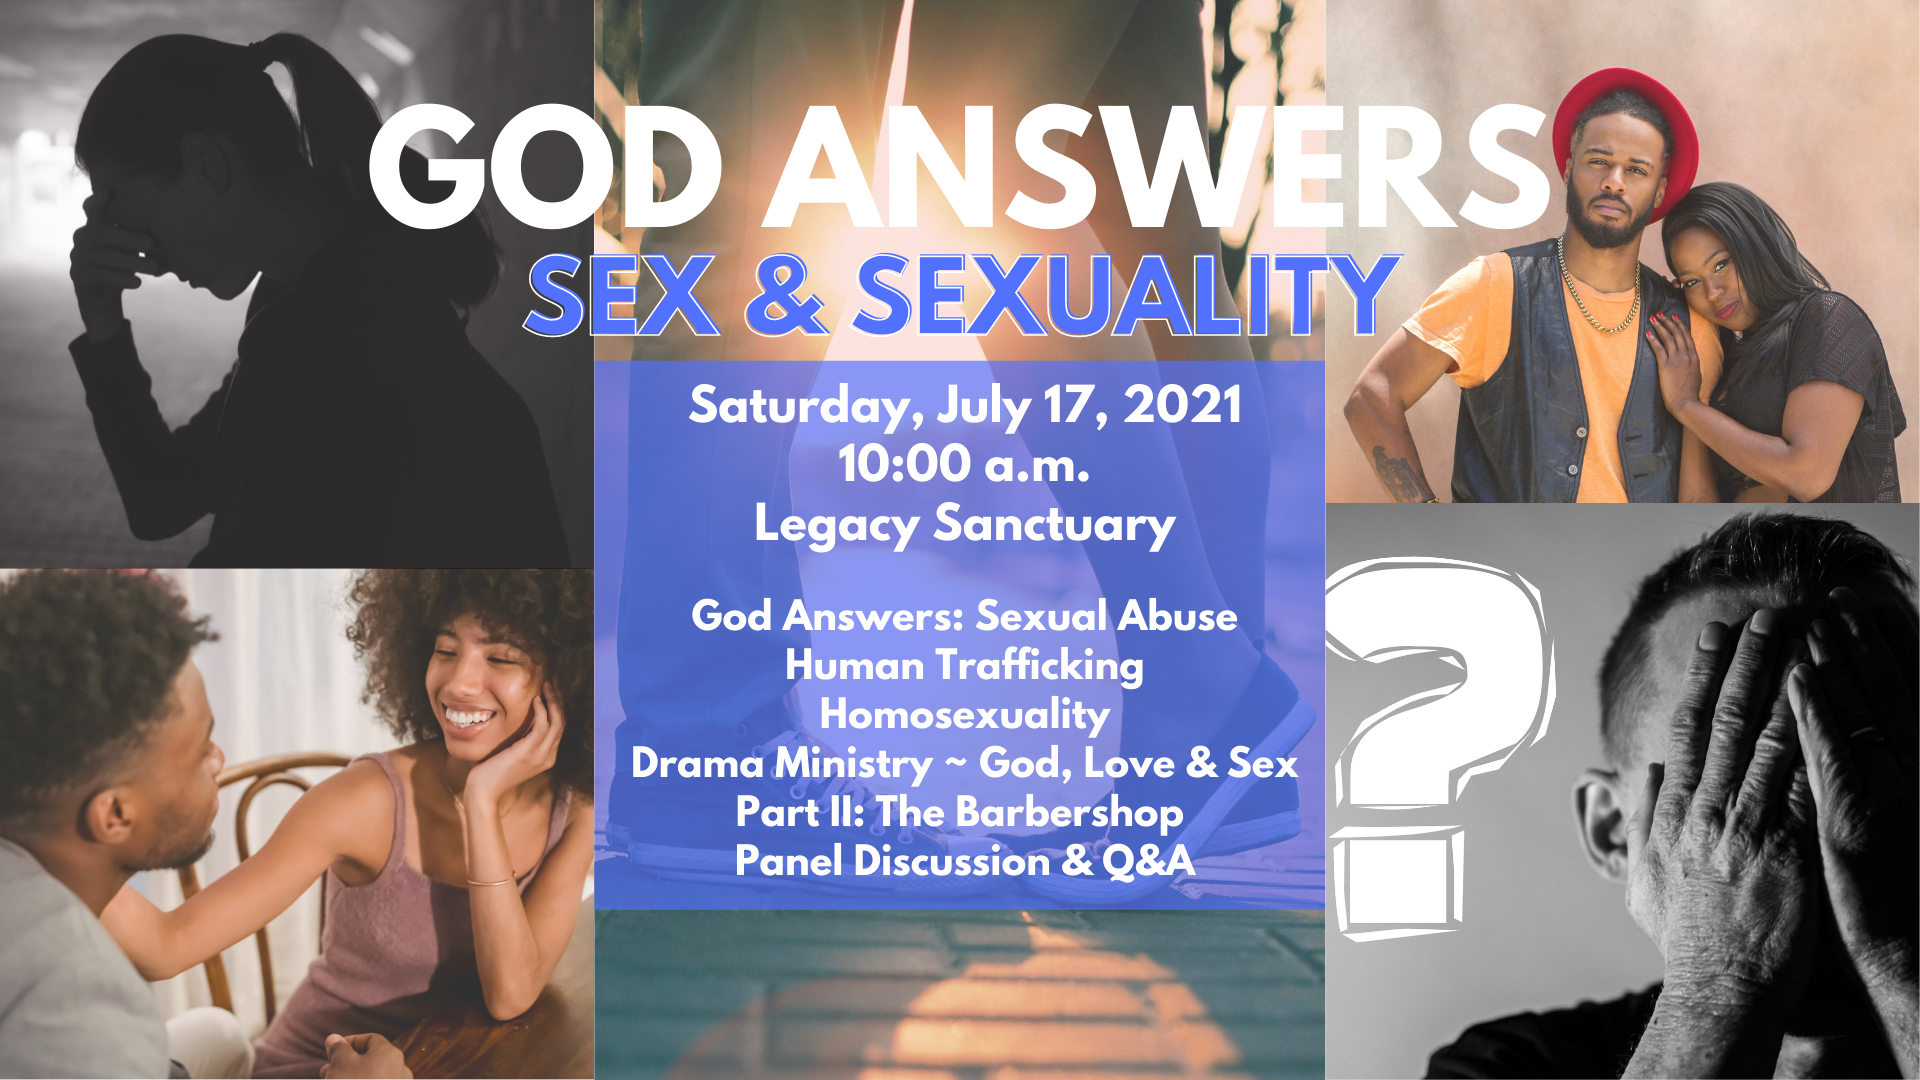 God Answers: Sex & Sexuality head image